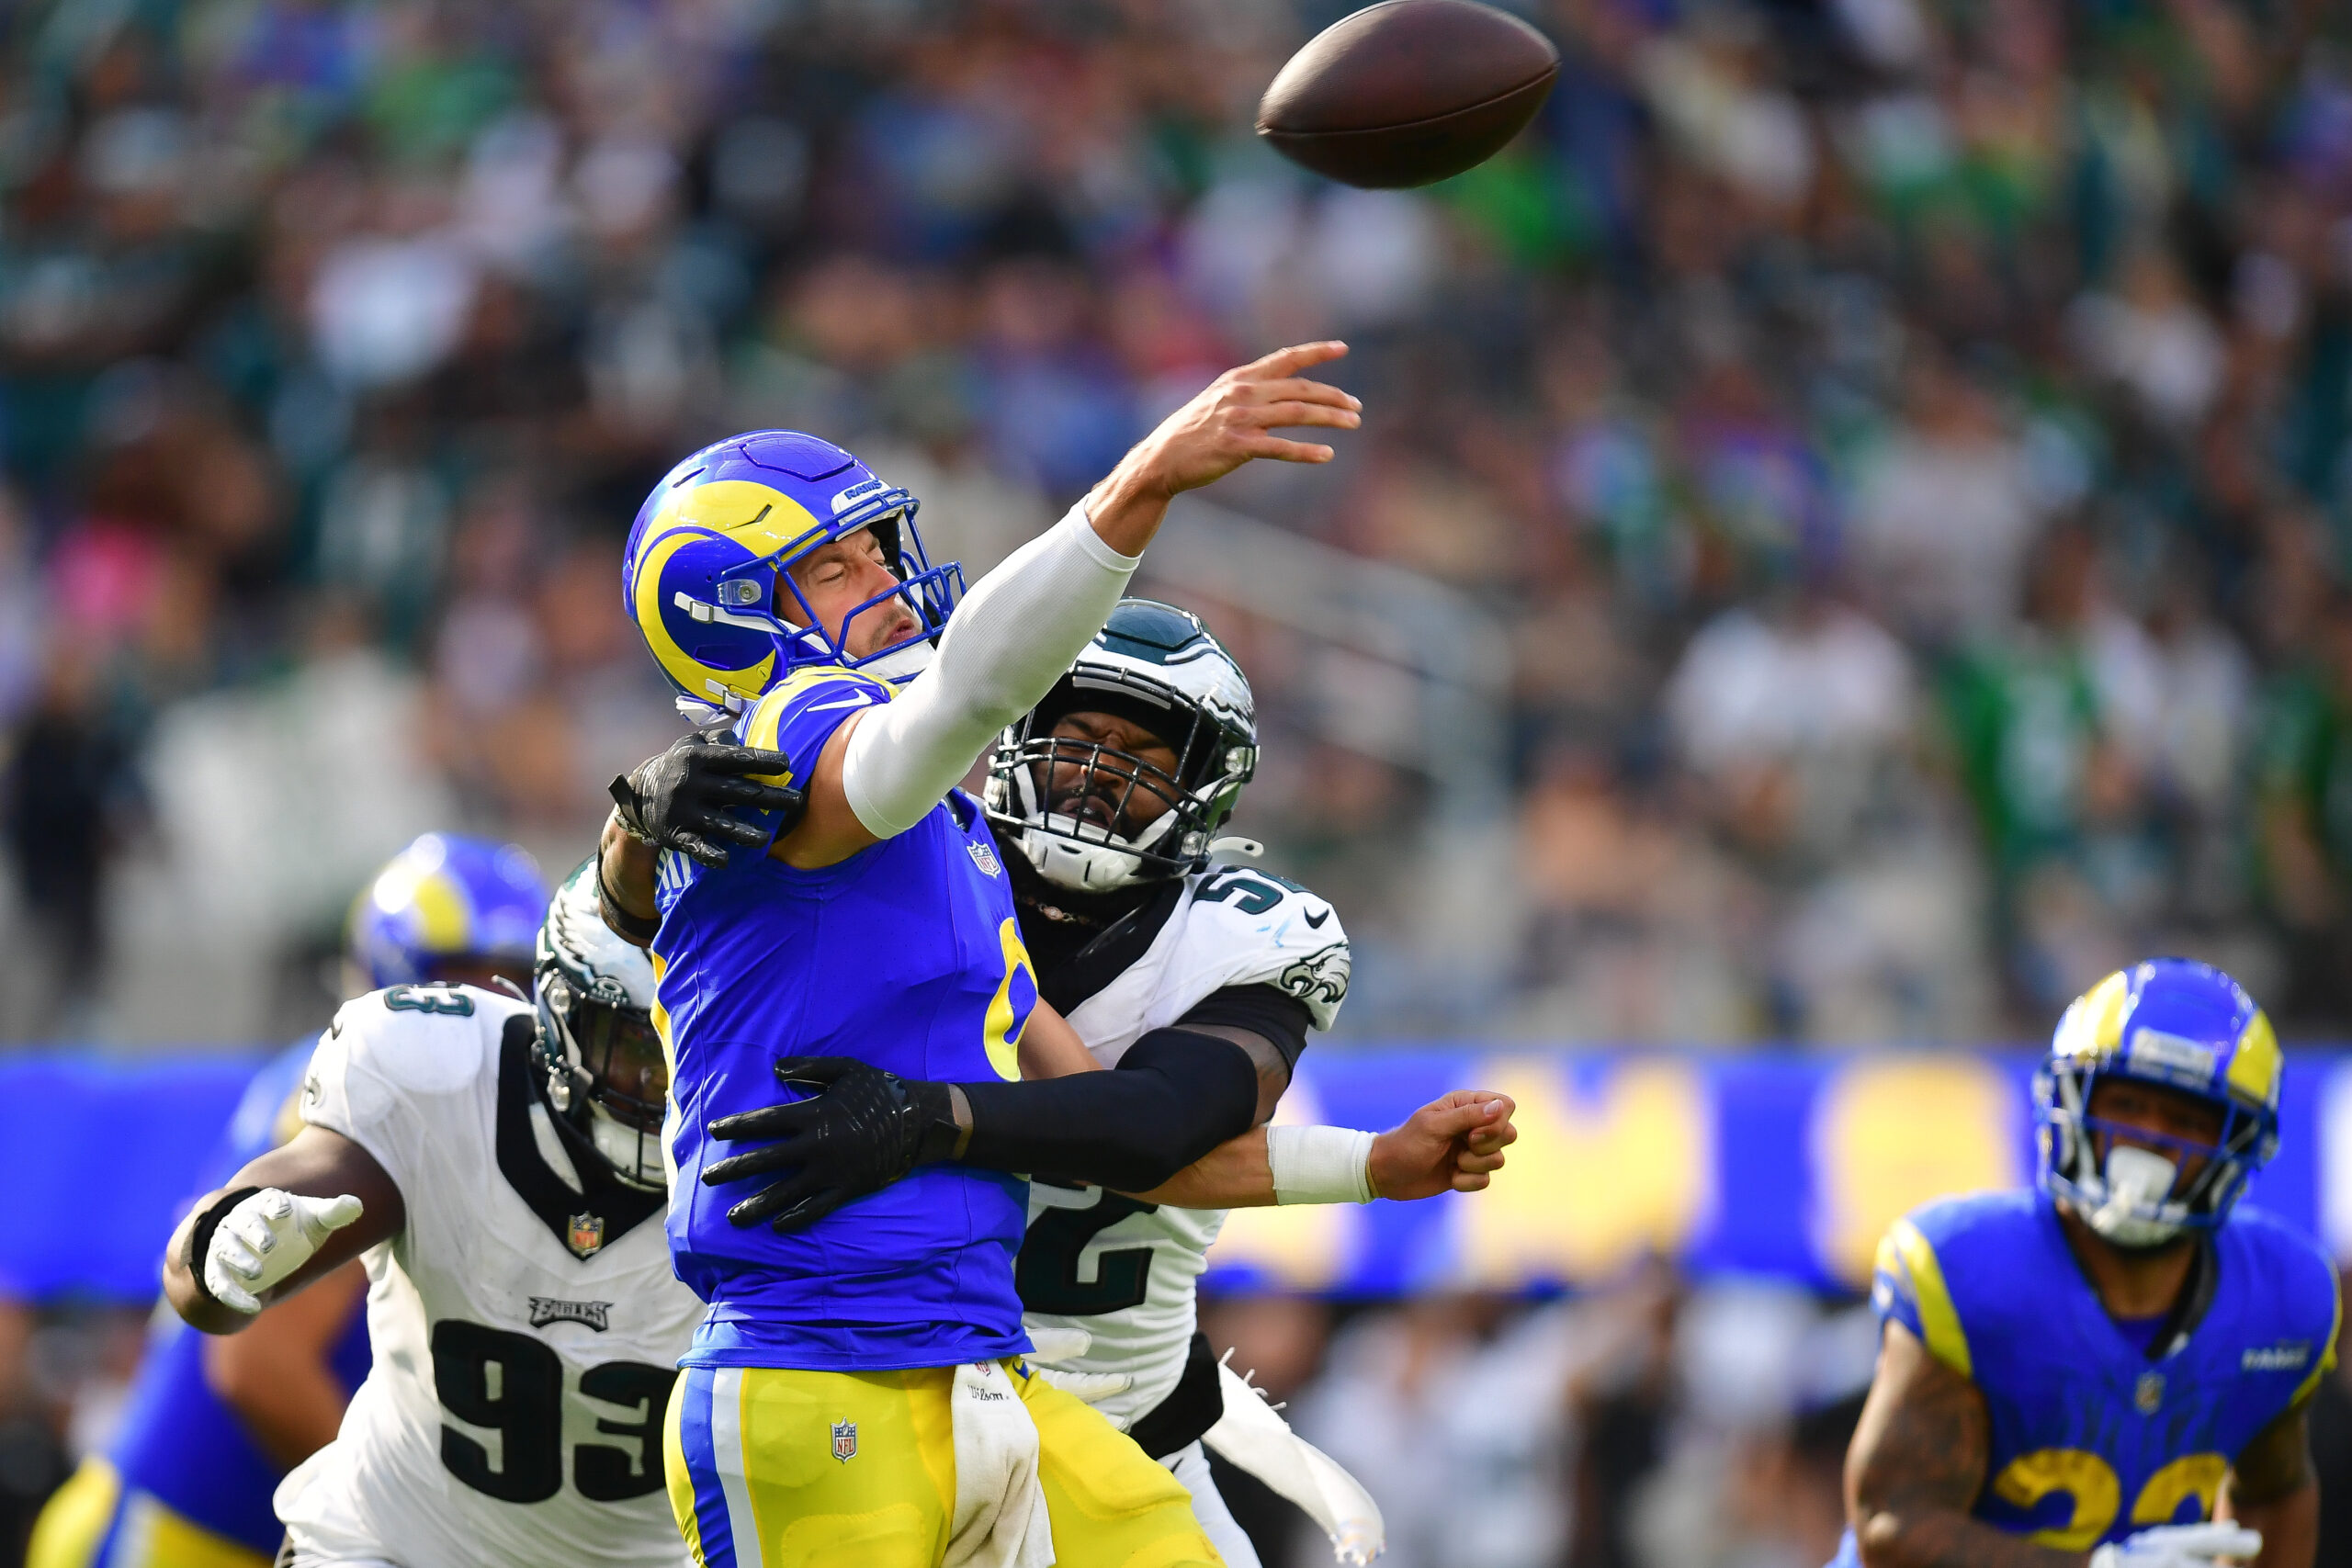 NFC West Watch: How the division fared in Week 5